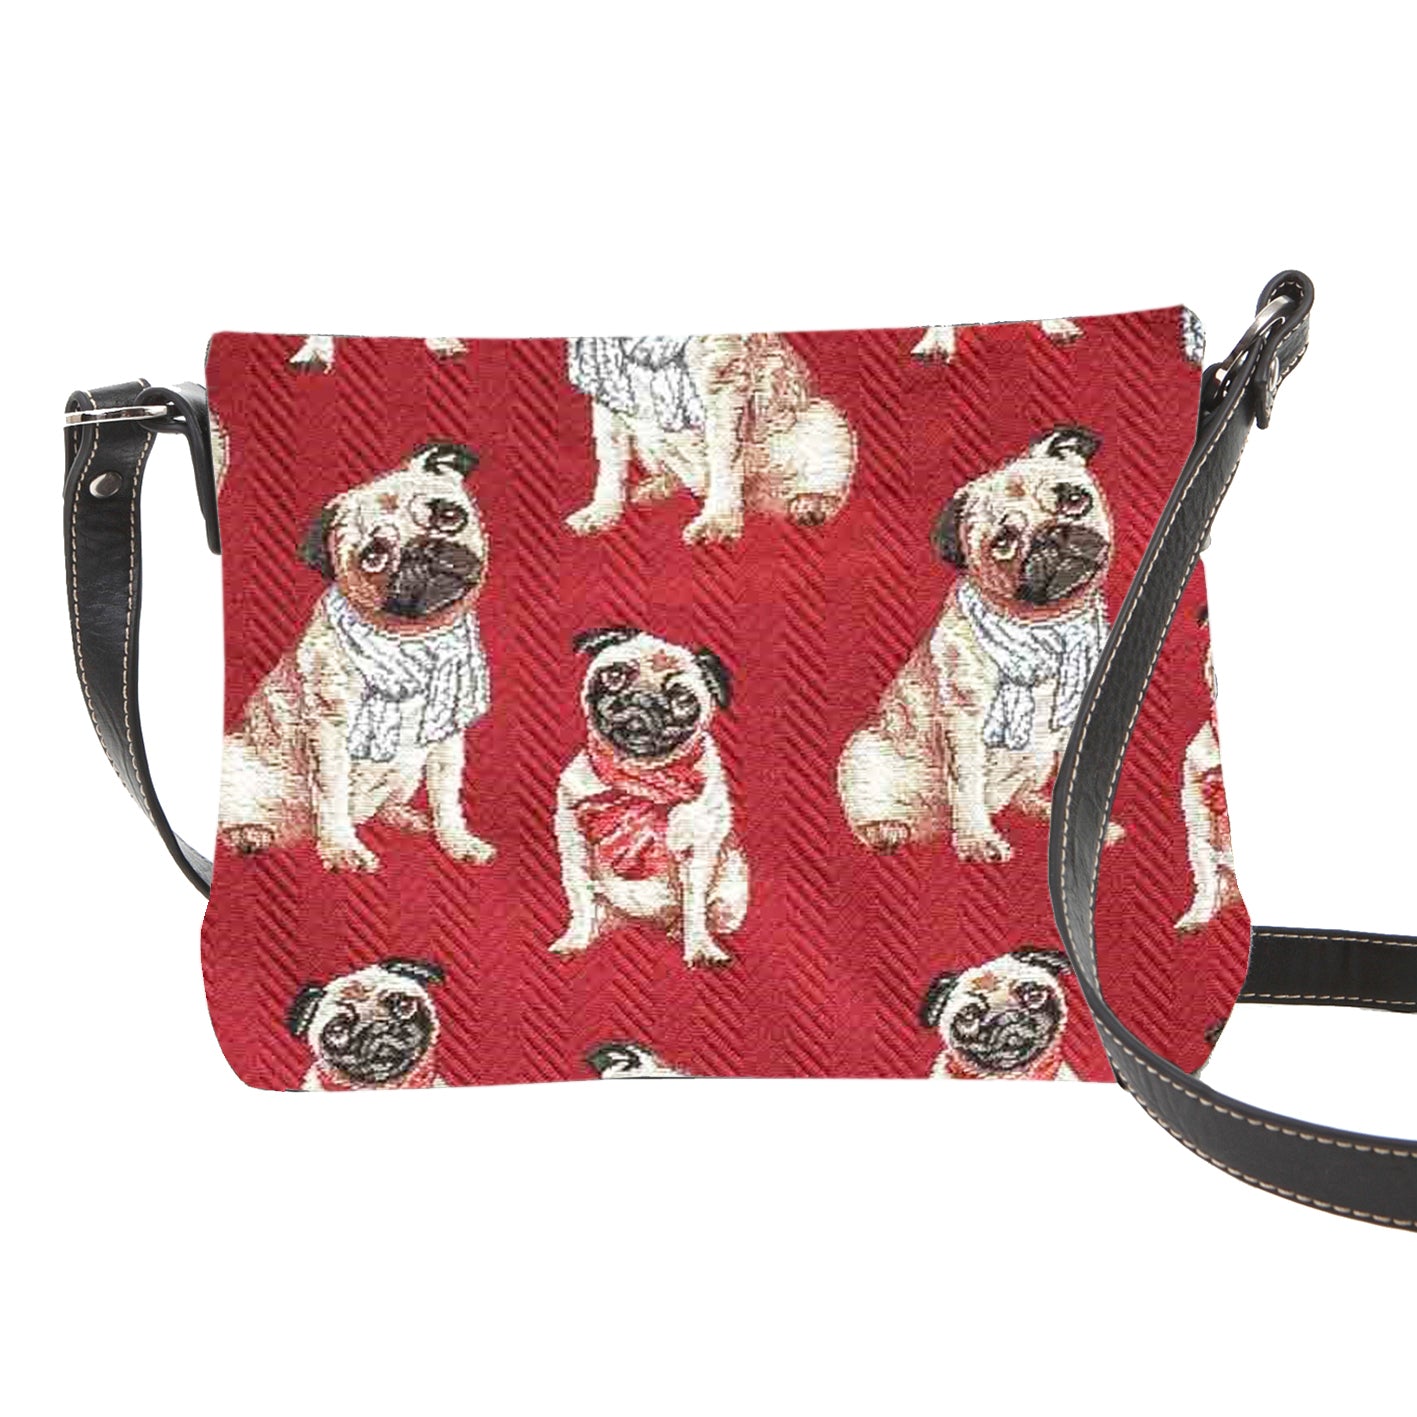 Update more than 176 pug bag latest